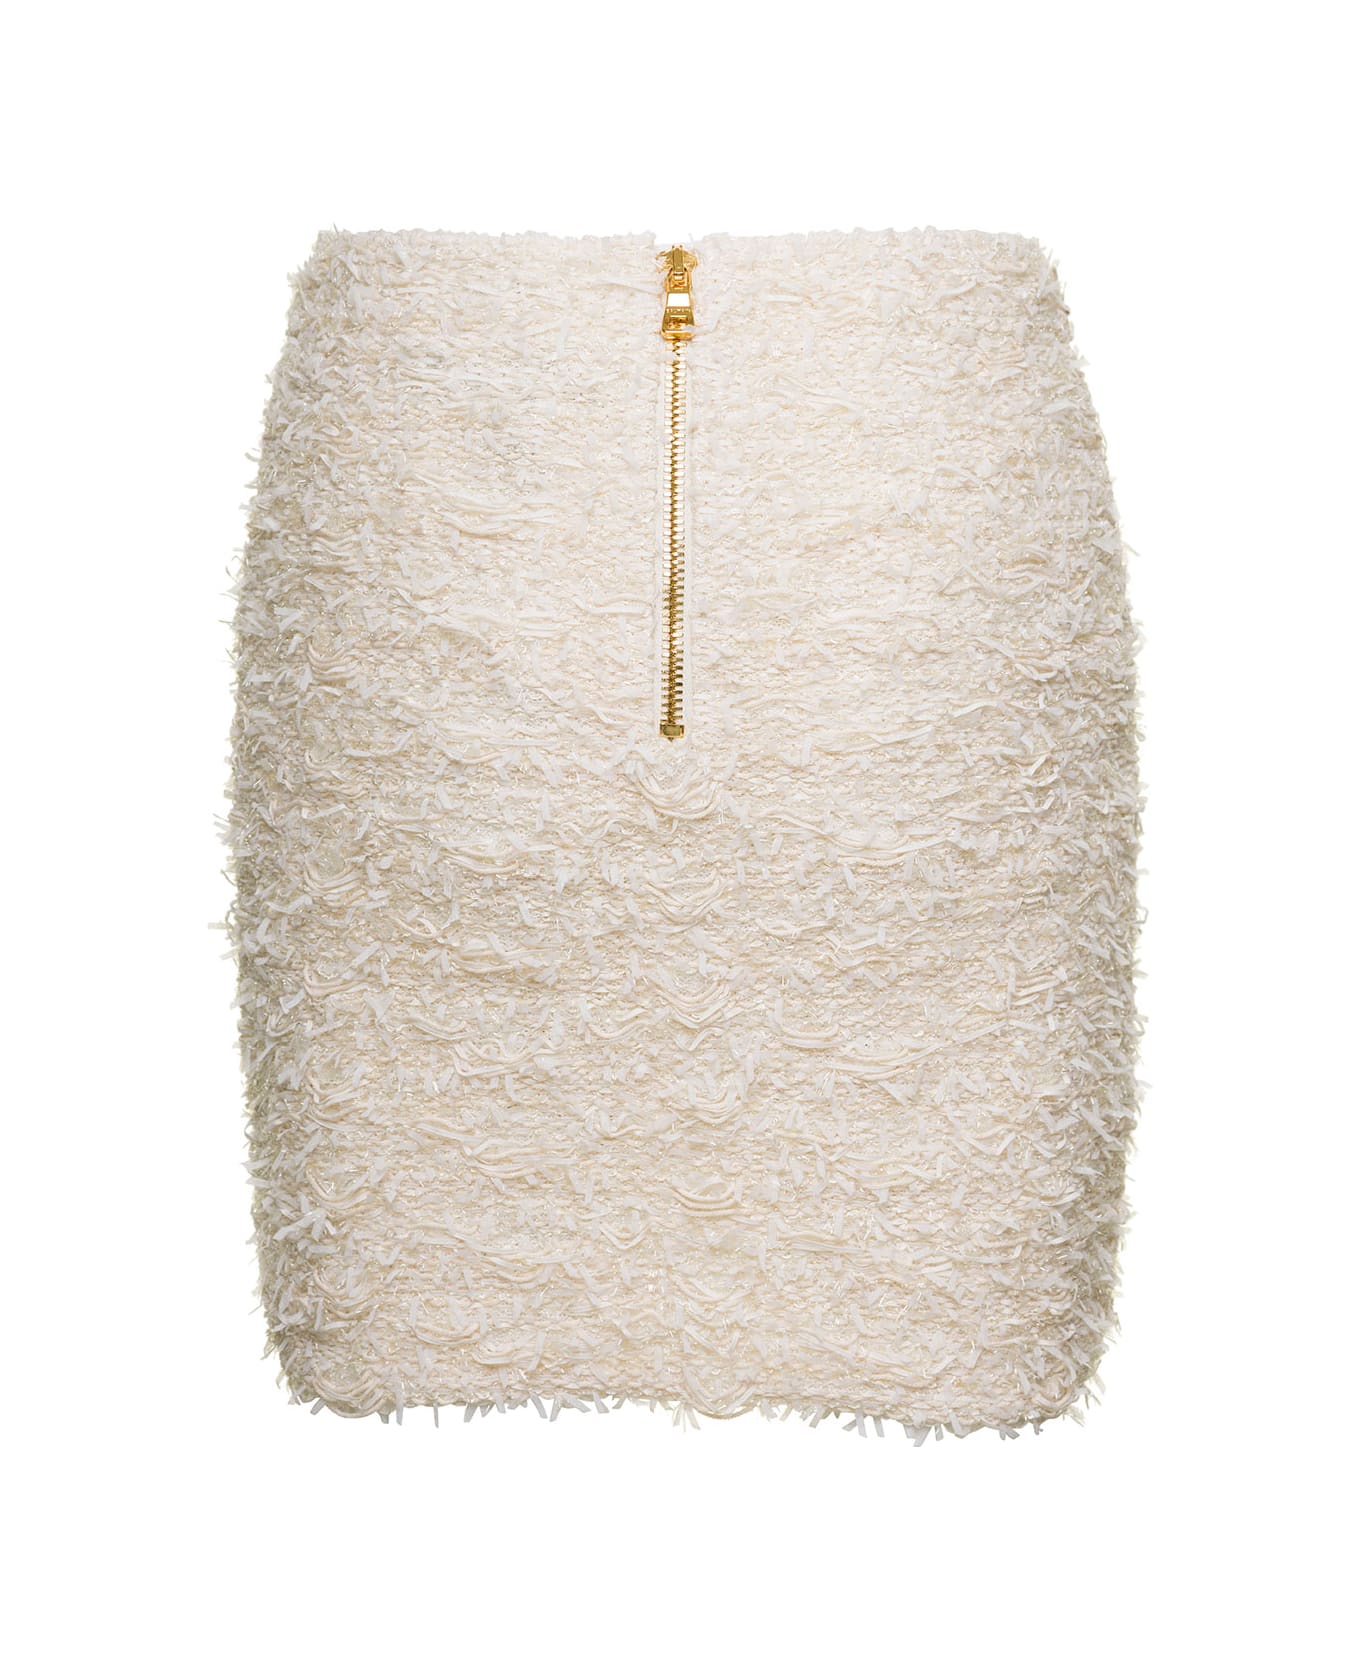 Balmain White Tweed High-waisted Miniskirt With Pockets In Cotton Blend Woman - White スカート